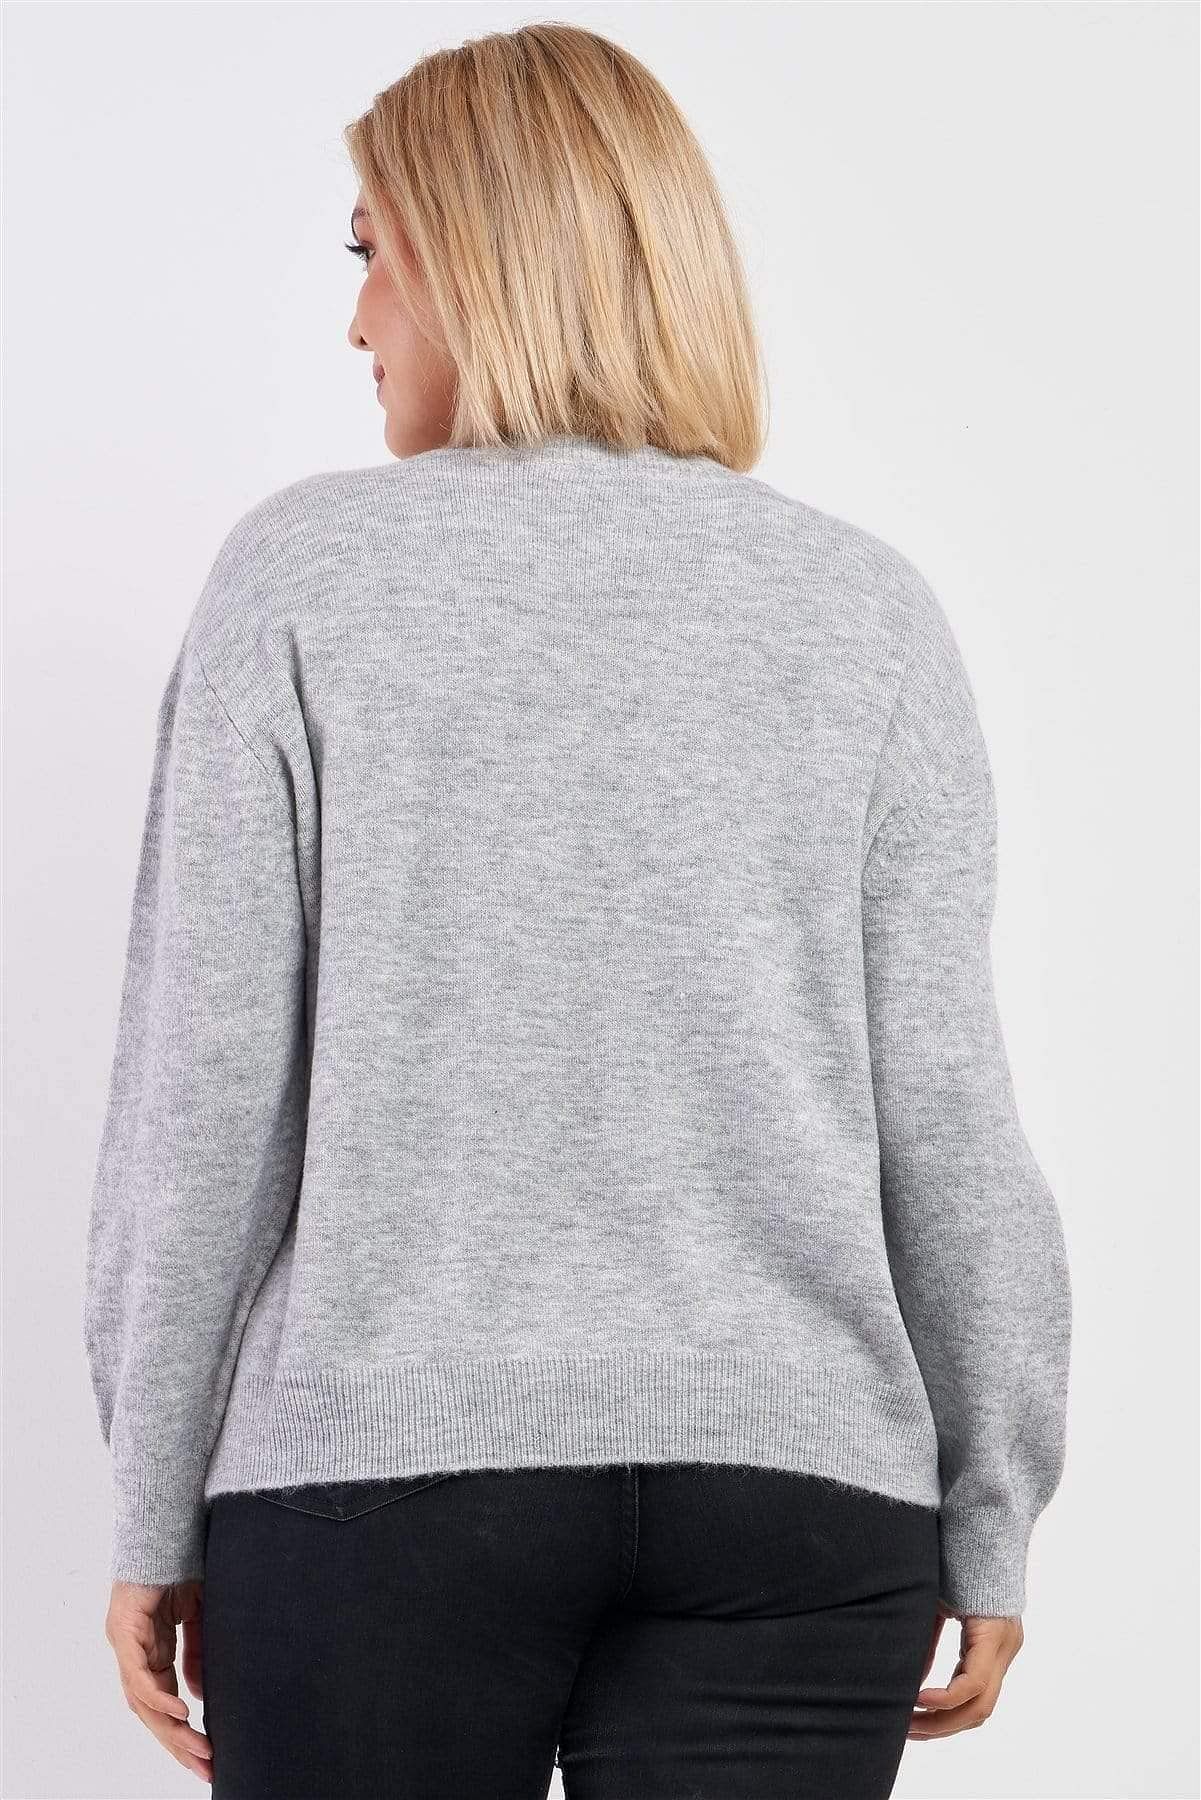 Heather Gray Plus Size Long Sleeve Sweatshirt - Shopping Therapy Shirts & Tops